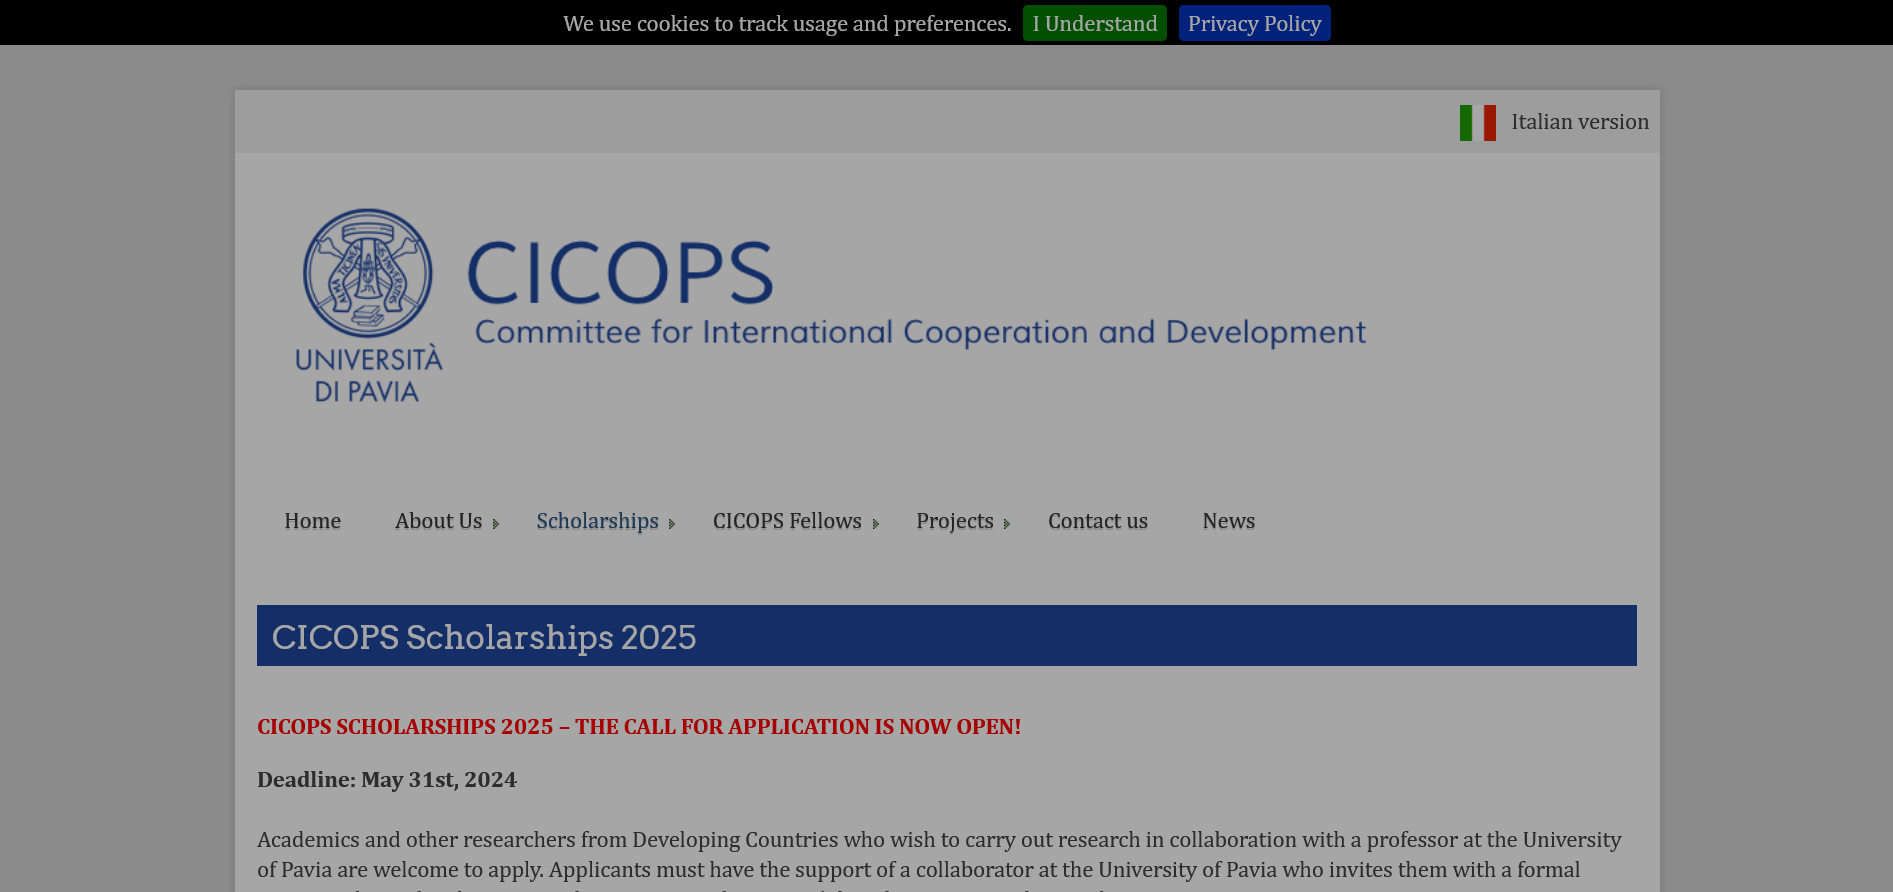 Committee for International Cooperation and Development (CICOPS) 2025 Academics and Research Scholarships